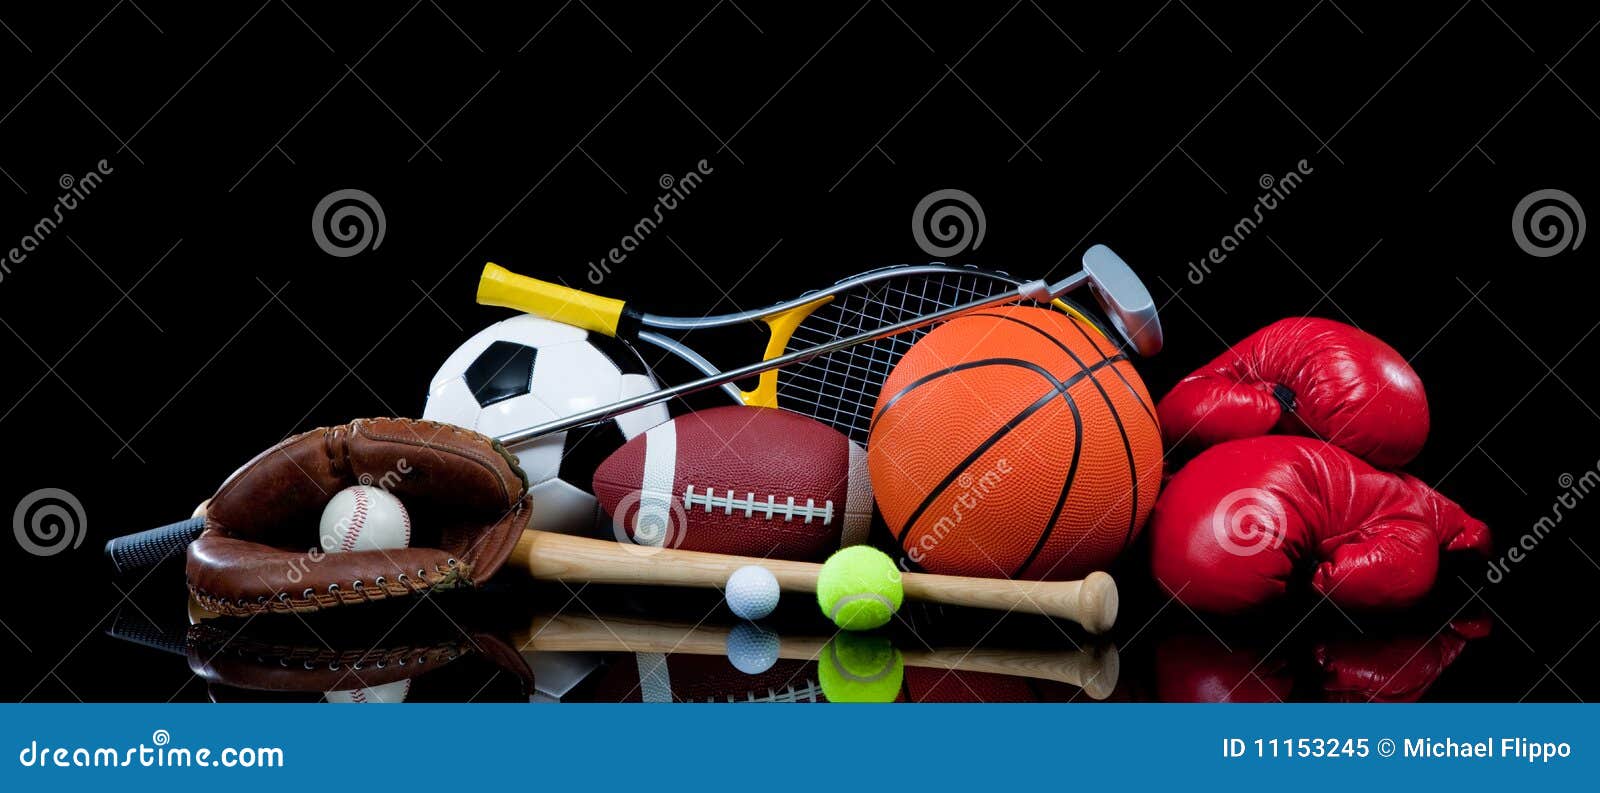 assorted sports equipment on black